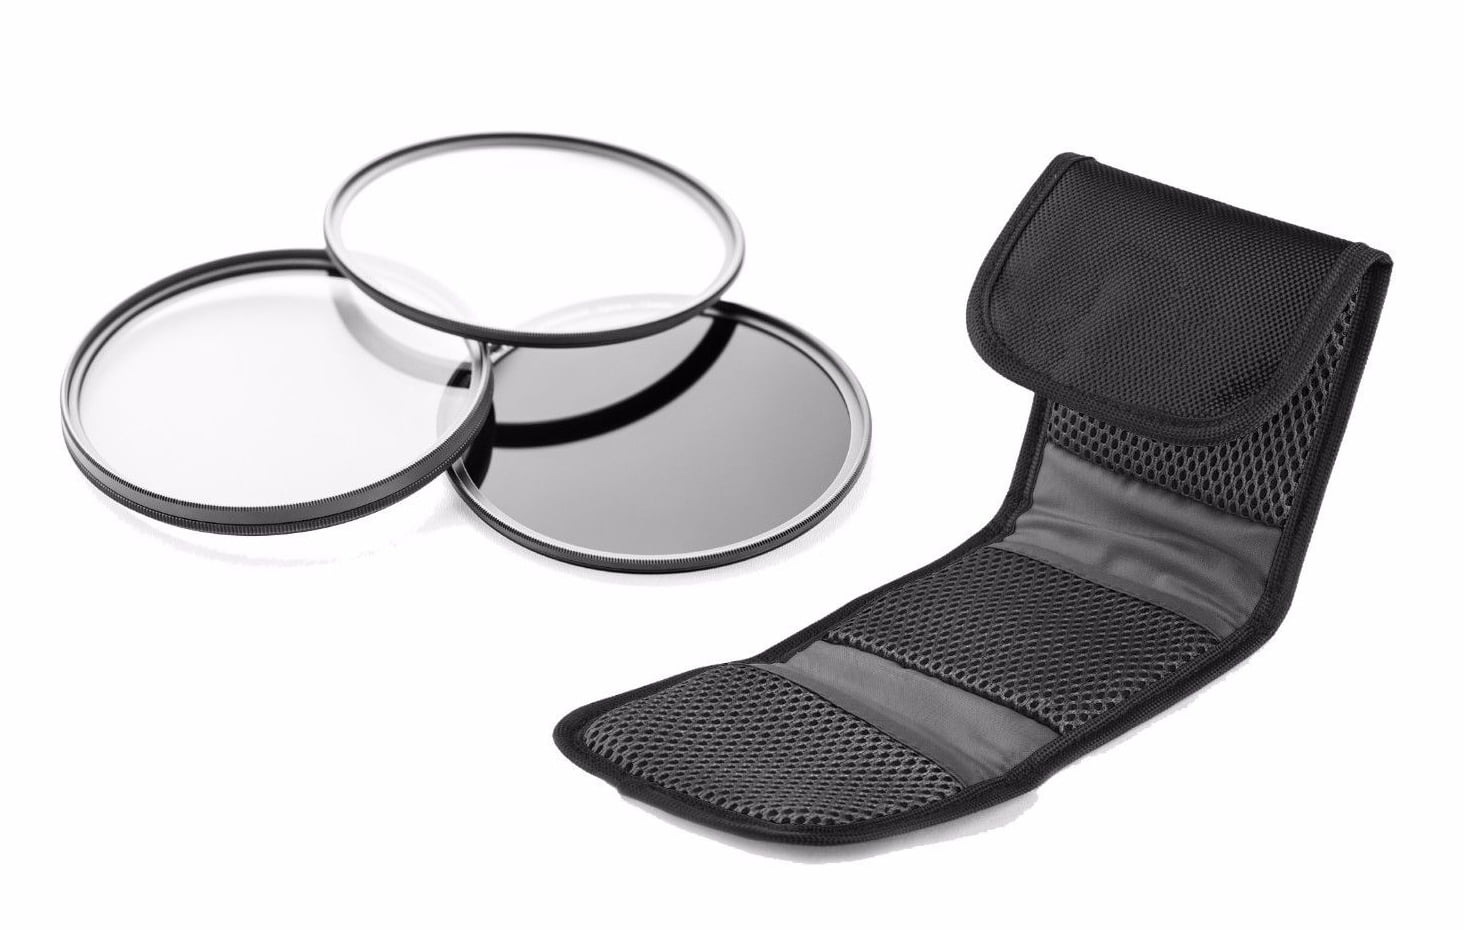 Canon EOS 5DS/5DS R High Grade Multi-Coated, Multi-Threaded, 3 Piece Lens  Filter Kit (72mm) Made By Optics + Nw Direct Microfiber Cleaning Cloth.